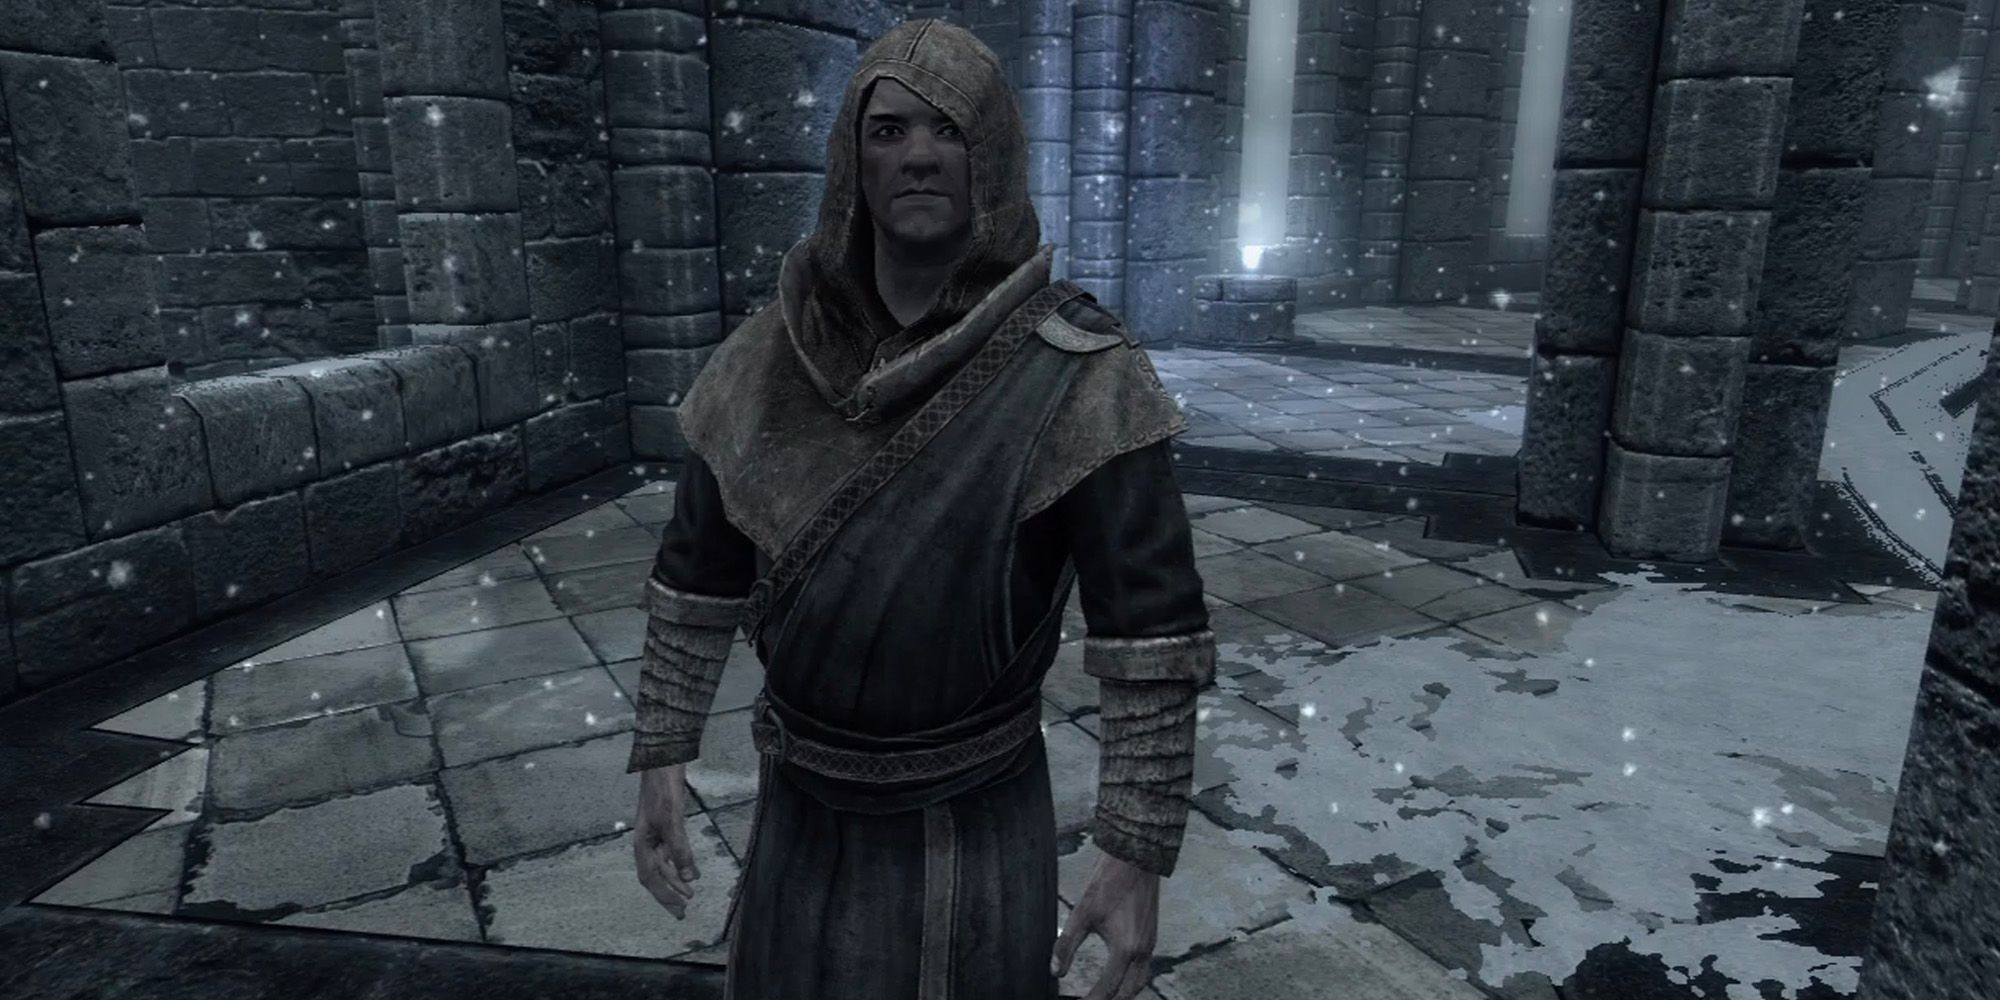 Onmund waiting for a command at the college of winterhold in Skyrim